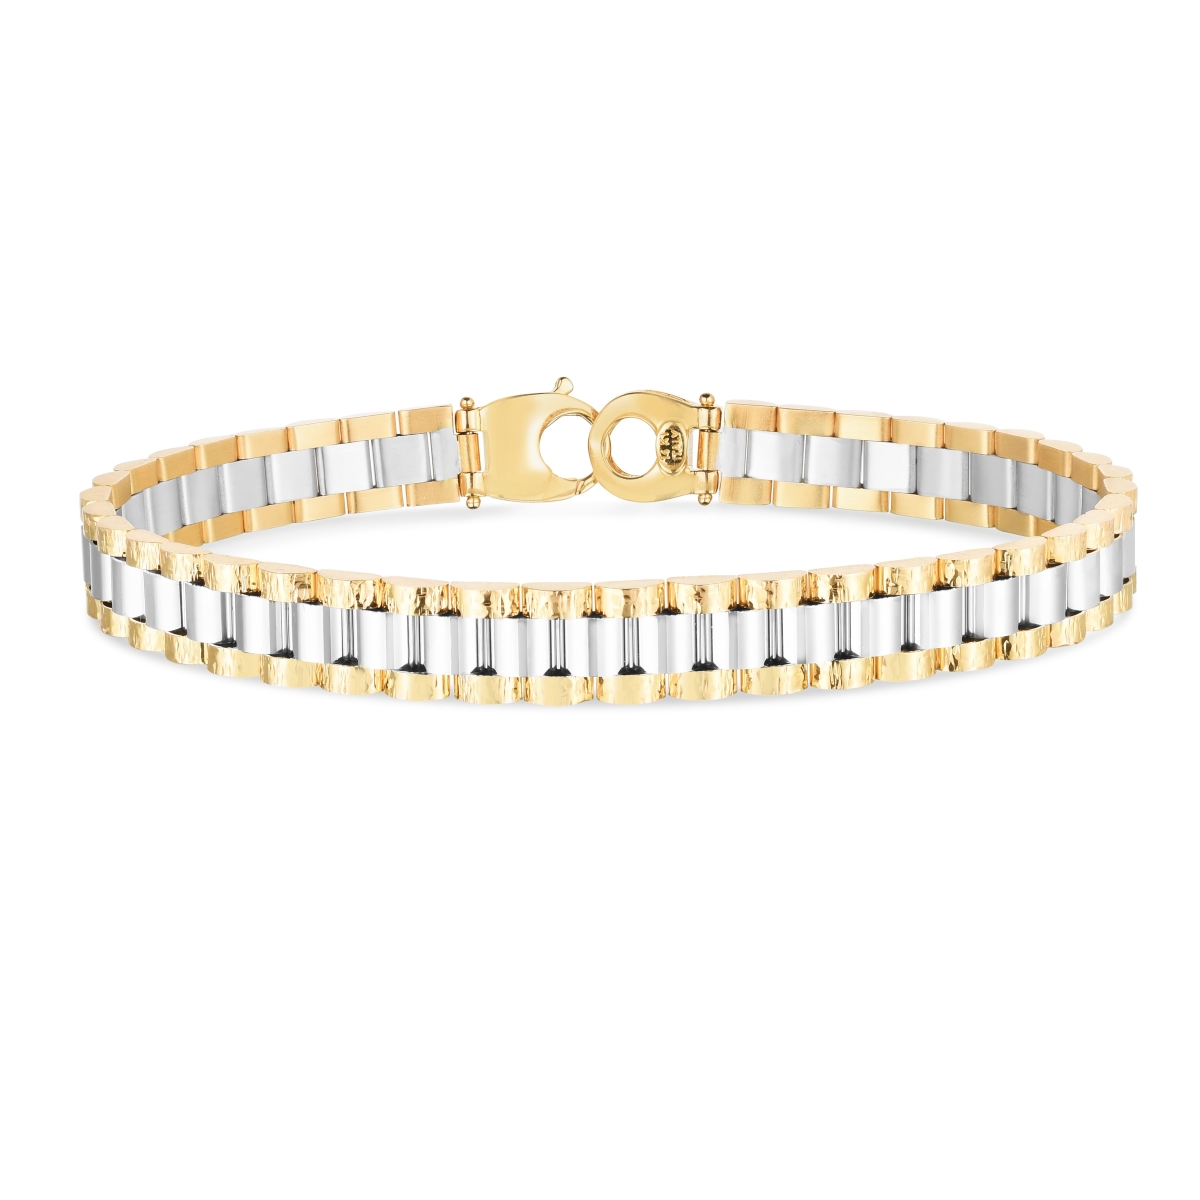 Bagatela 8.25 in. 14K Two Tone Gold Textured Rail Road Link Bracelet with Fancy Pear Shaped Lobster Clasp